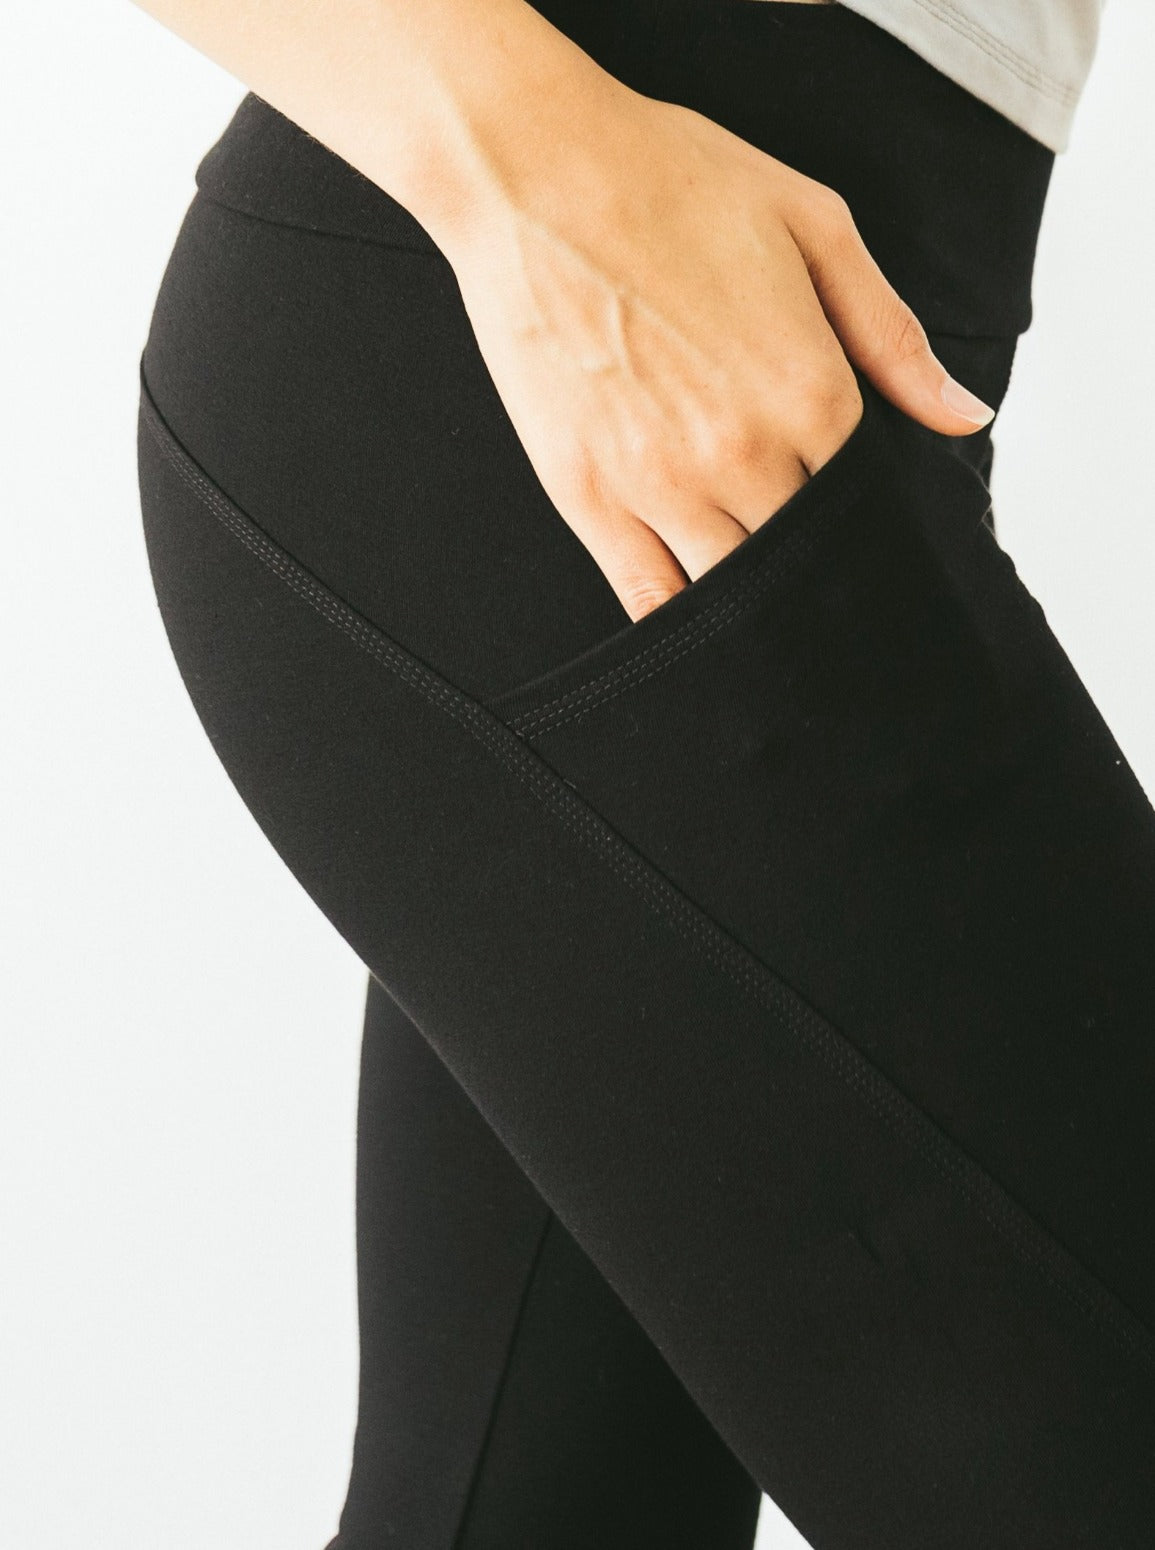 Canadian made leggings, Sustainable women's clothing